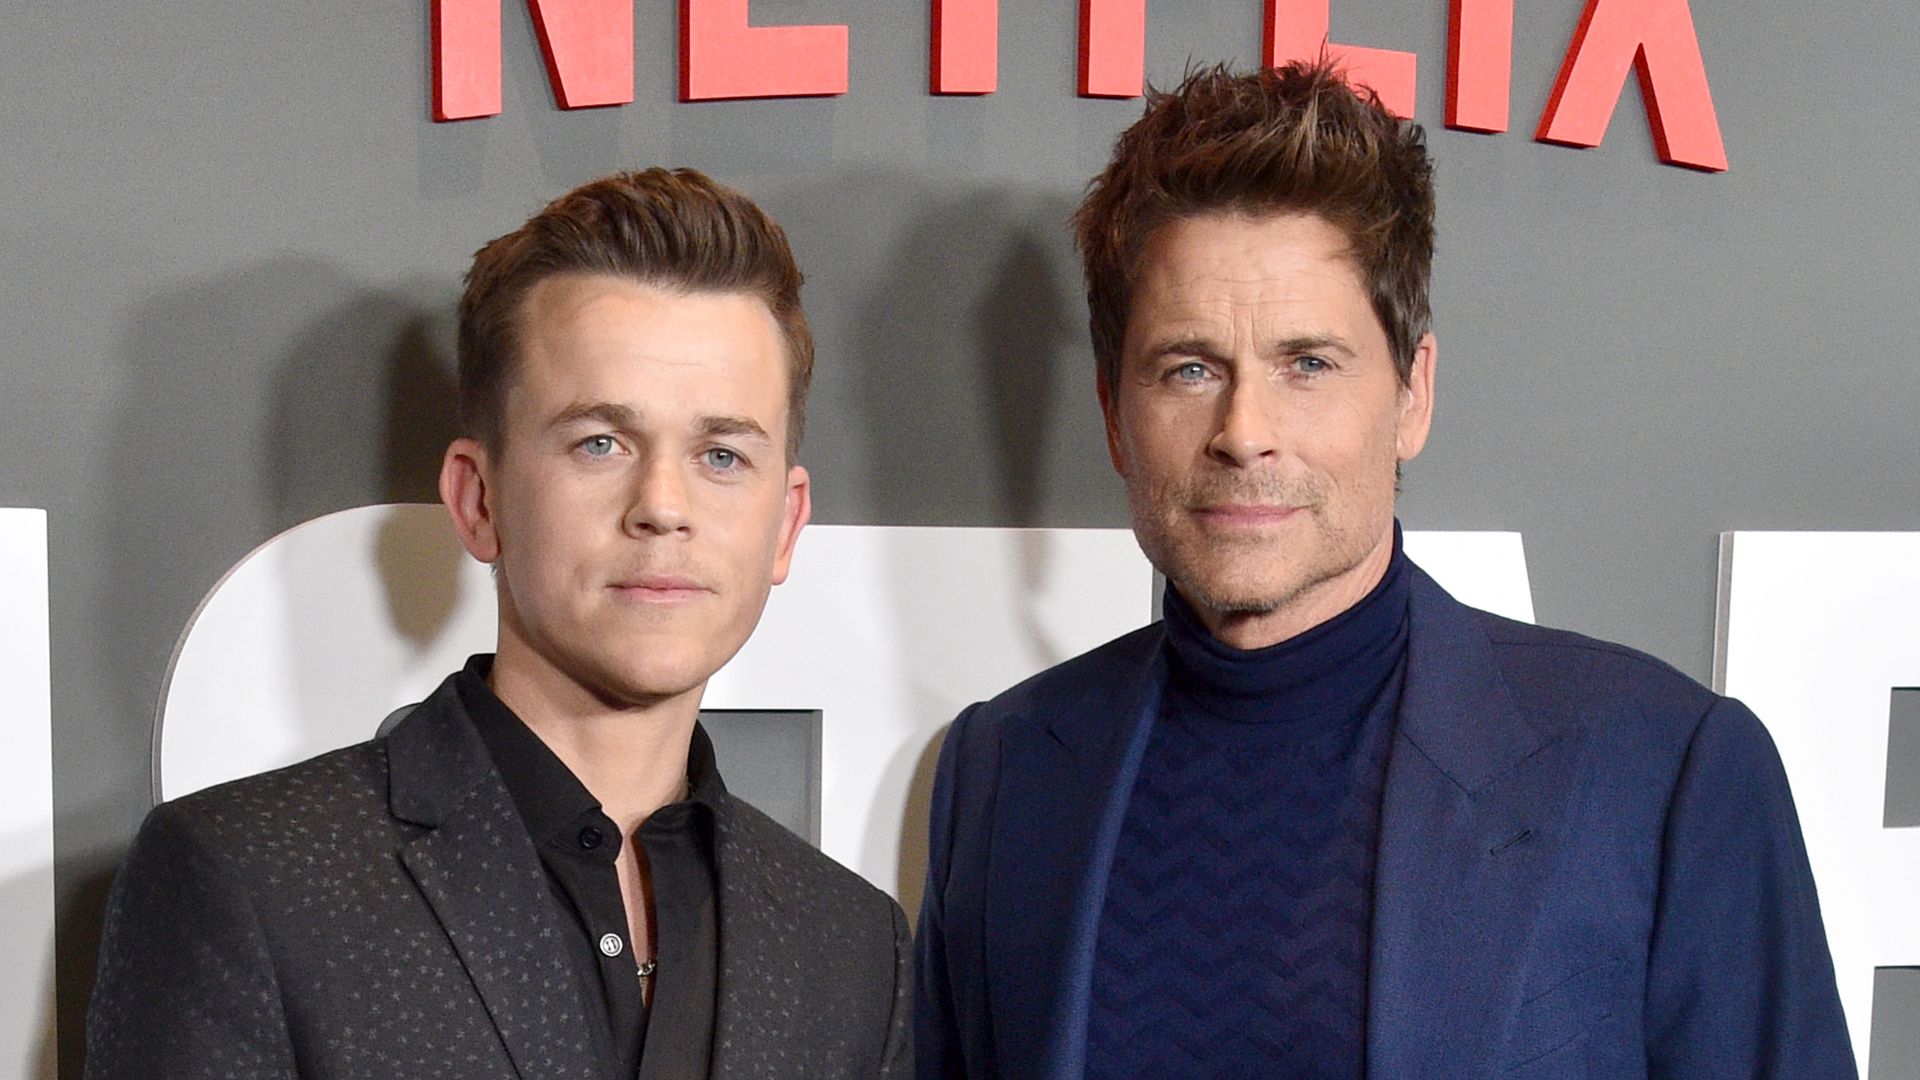 Rob Lowe and his son John Lowe at the premiere of Unstable